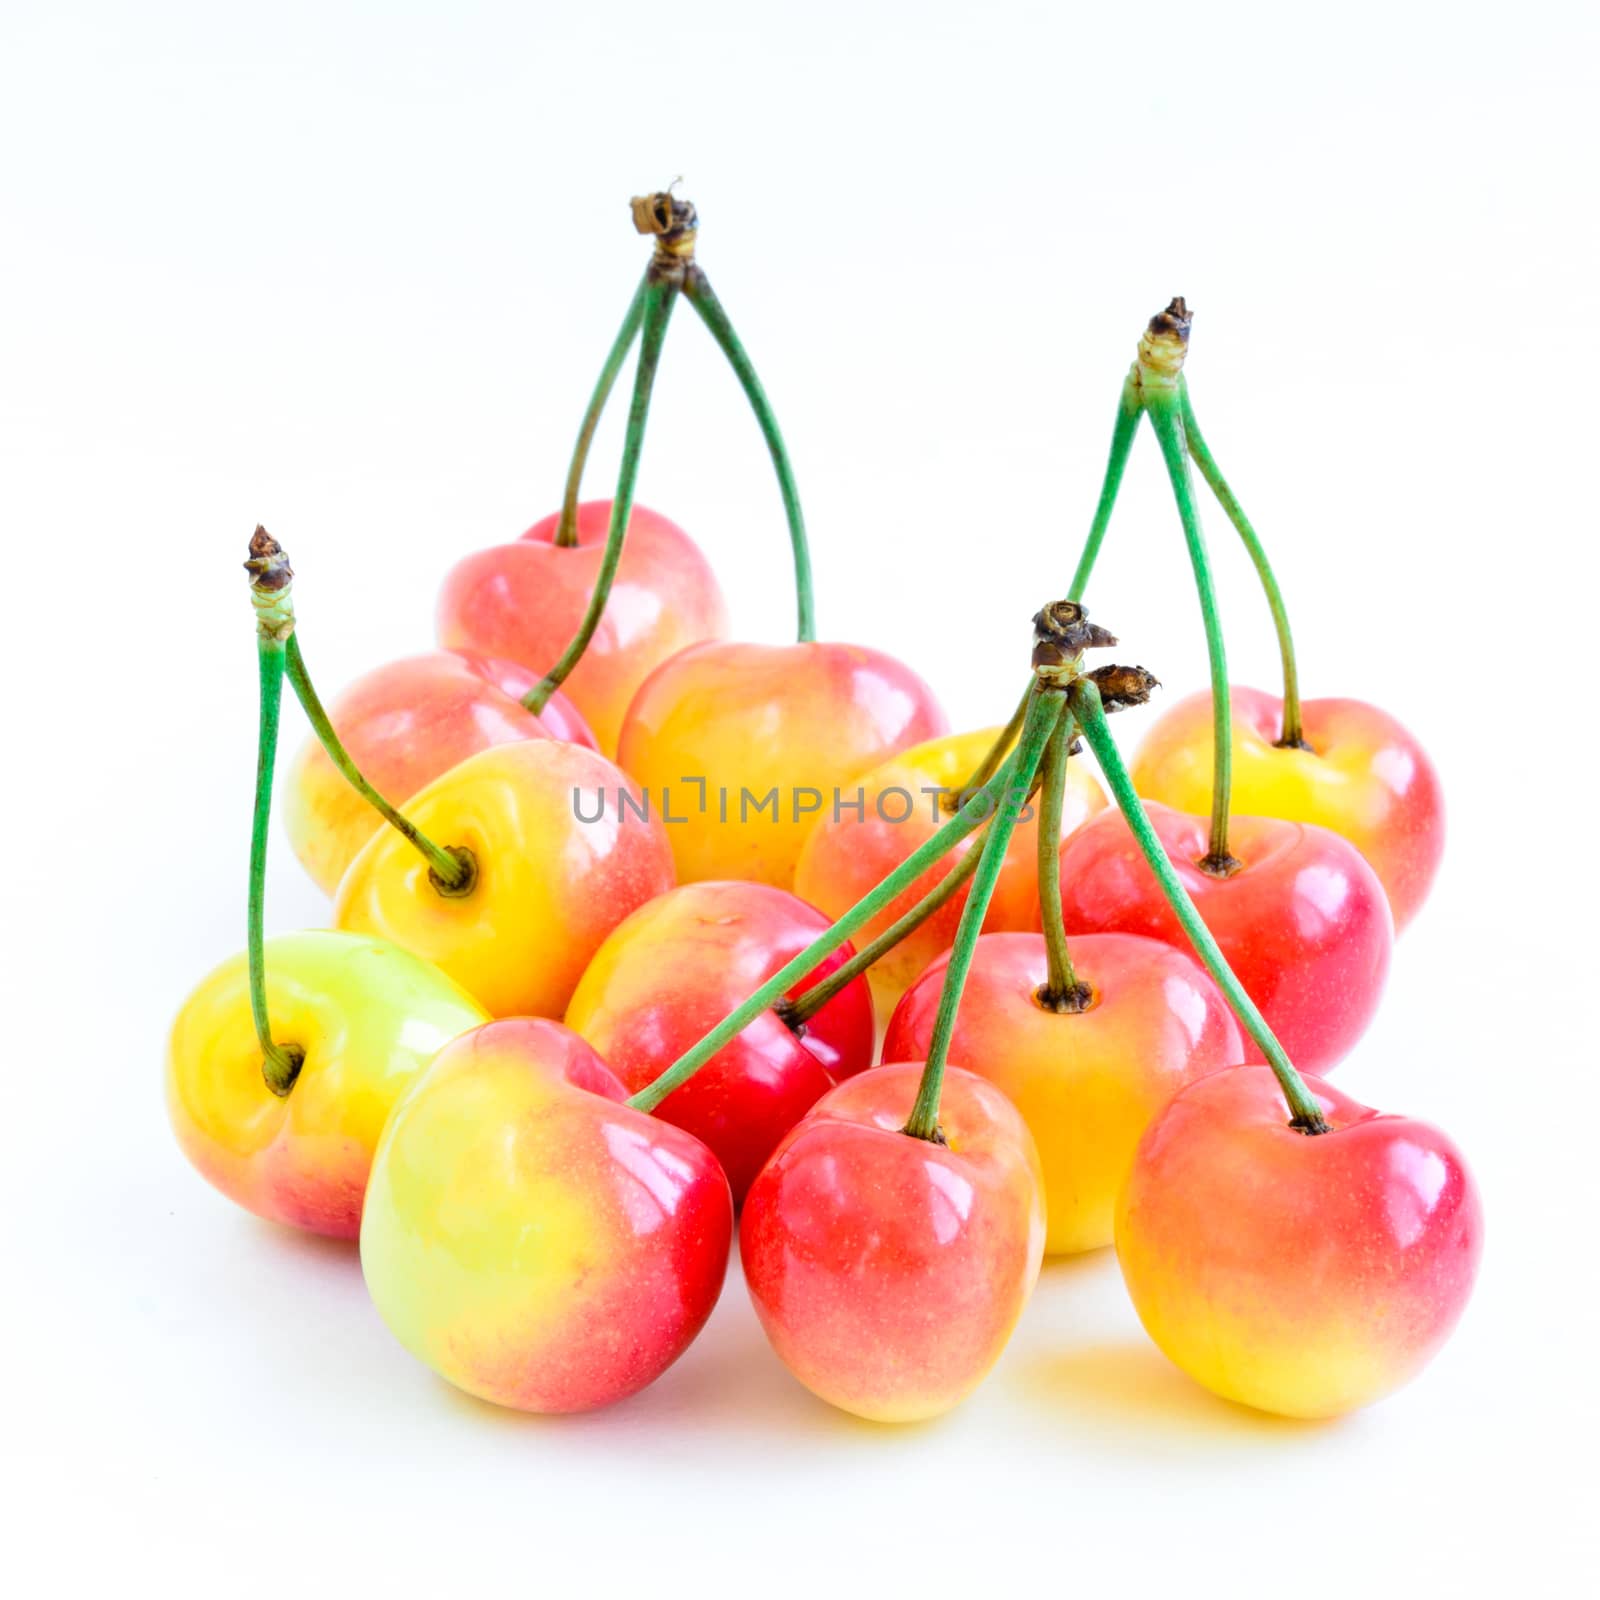 Studio shot group of Rainier cherries with long stems isolated on white by trongnguyen